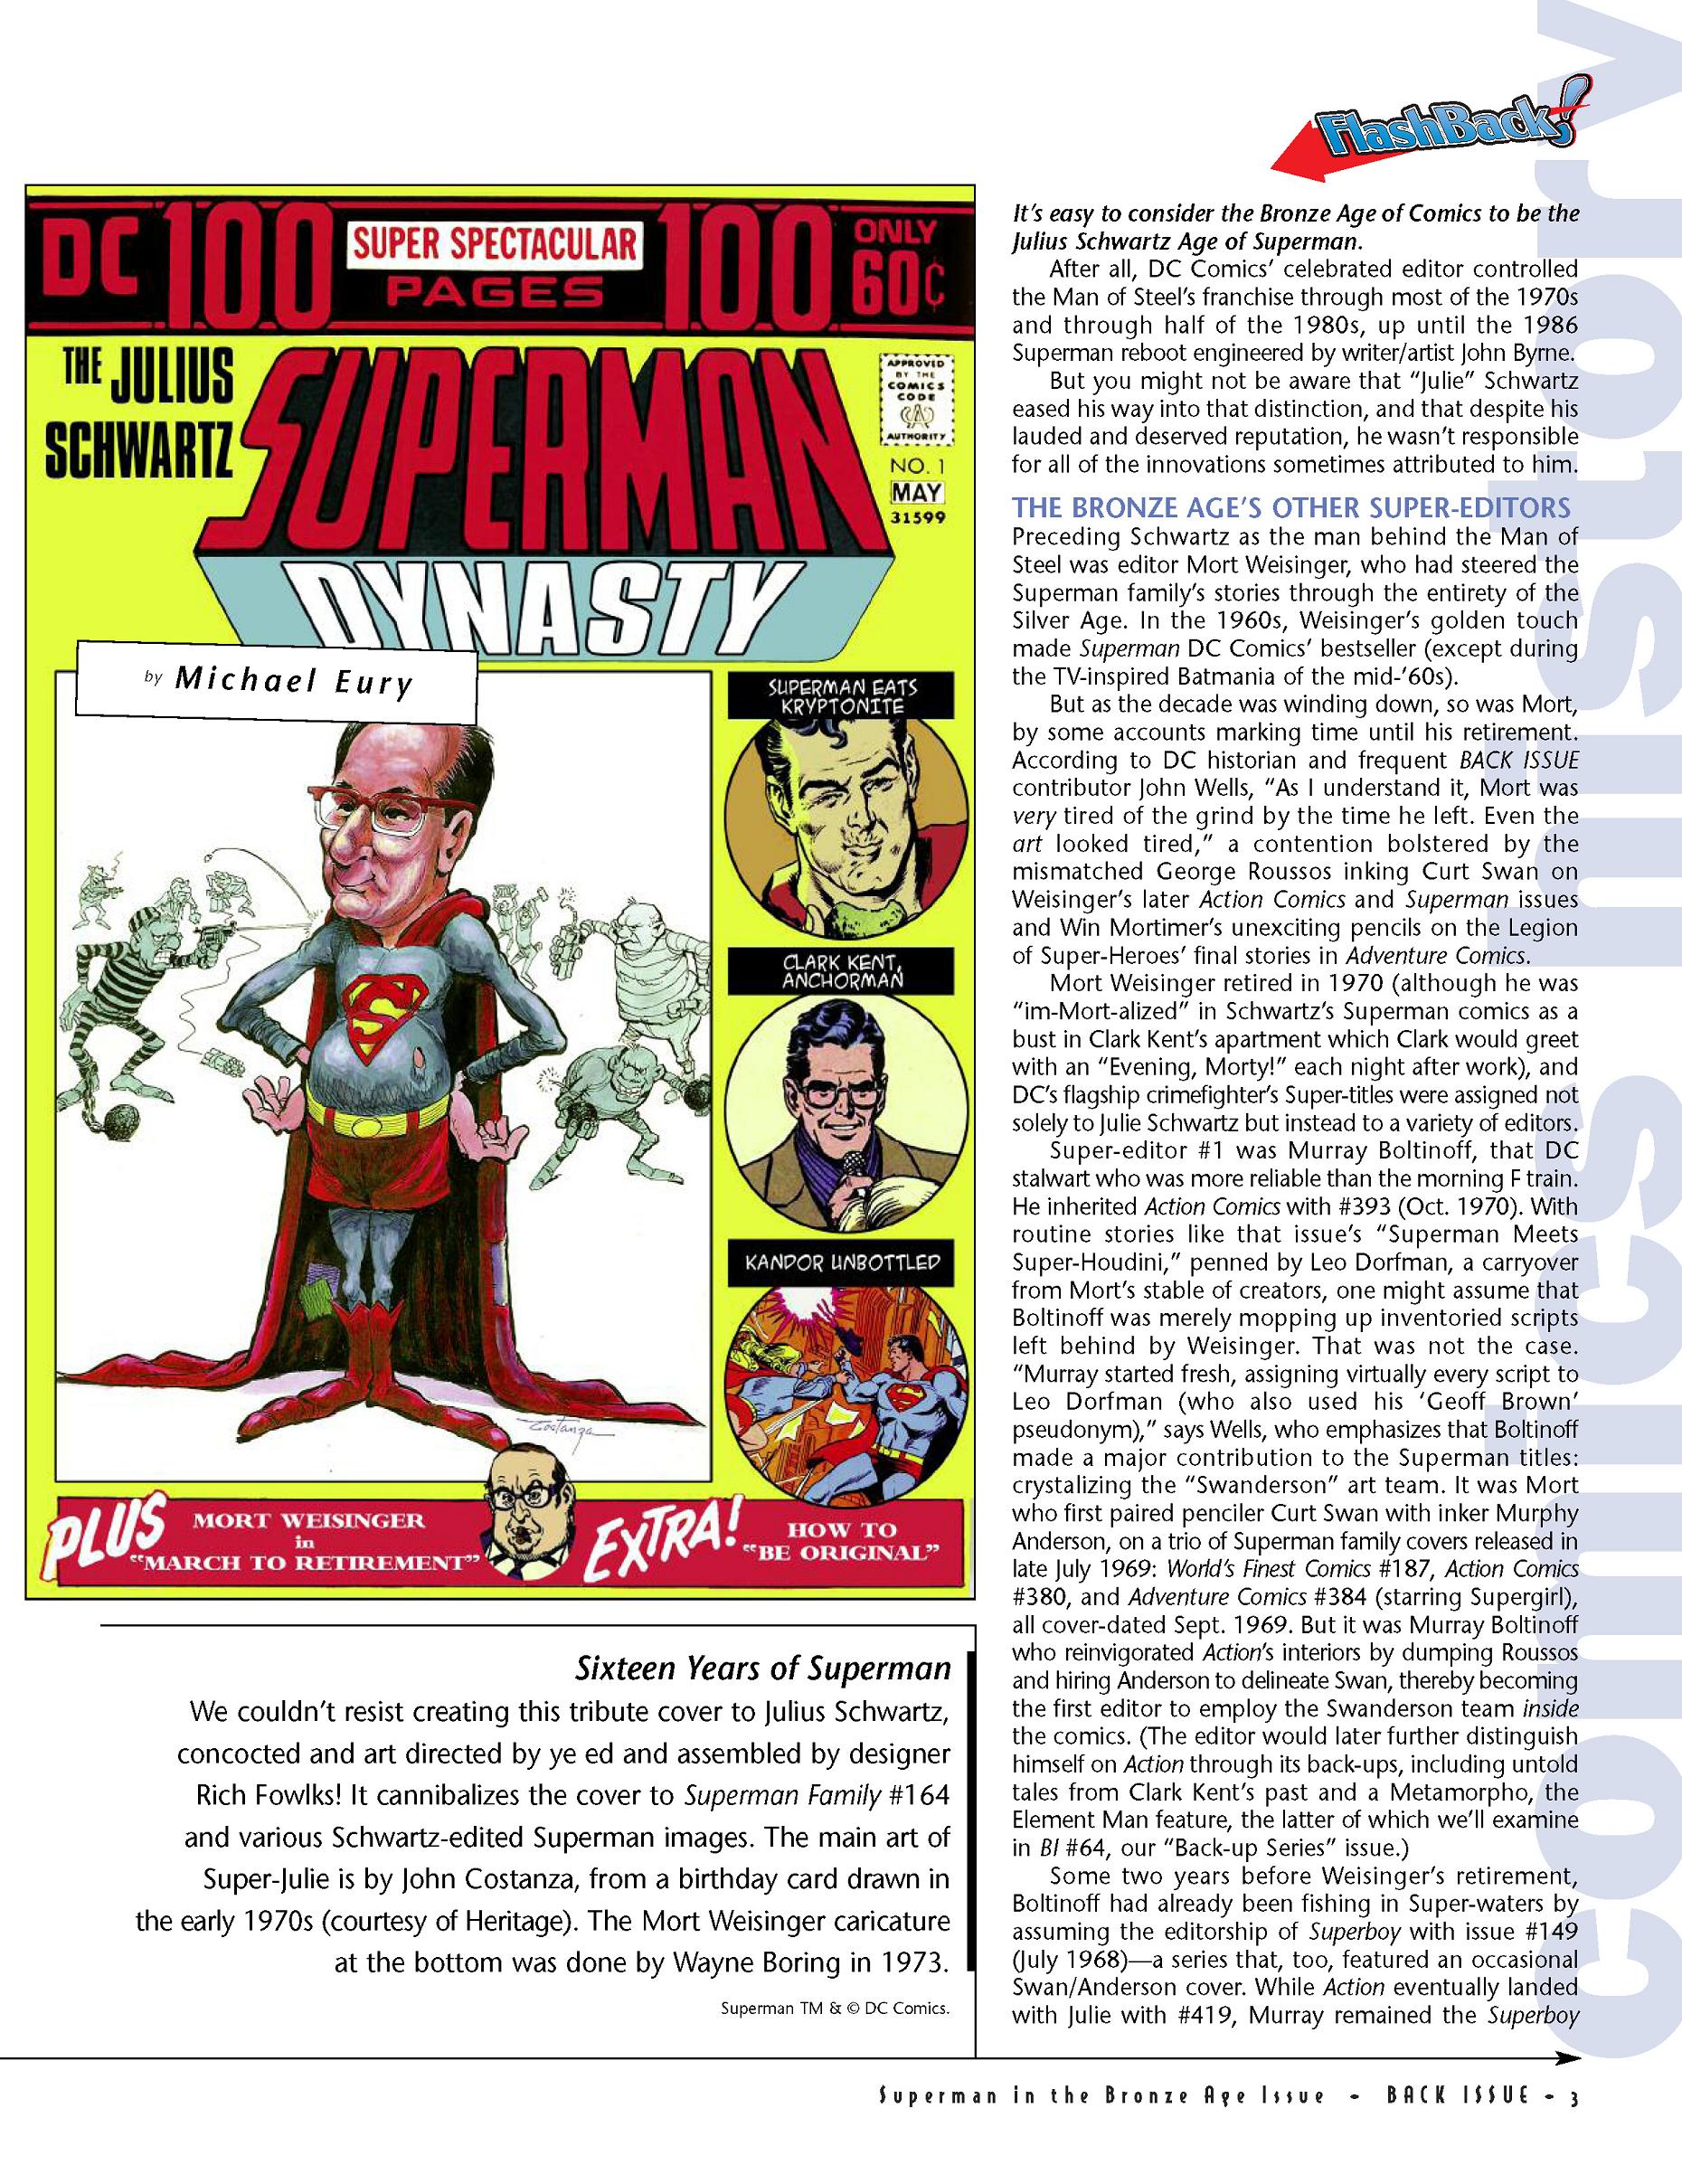 Read online Back Issue comic -  Issue #62 - 5